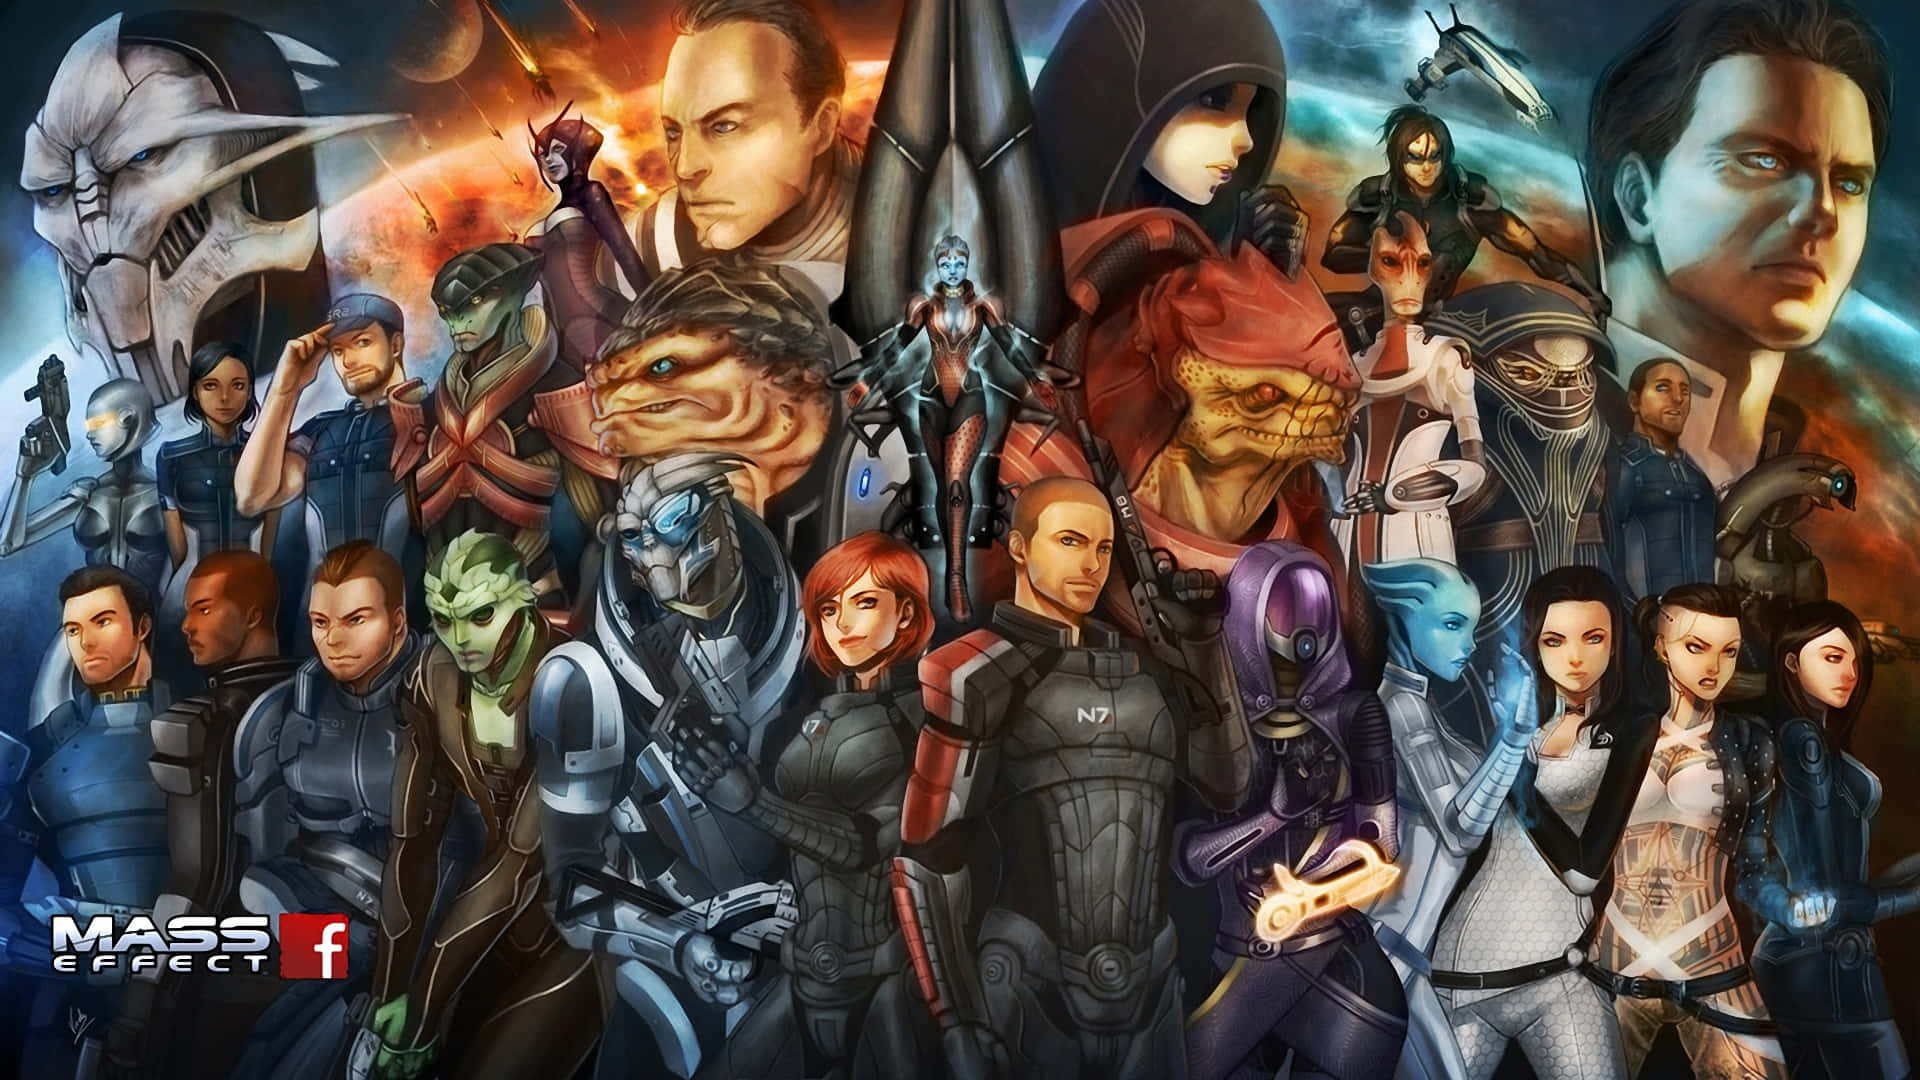 Caption: A thrilling journey with Mass Effect characters Wallpaper